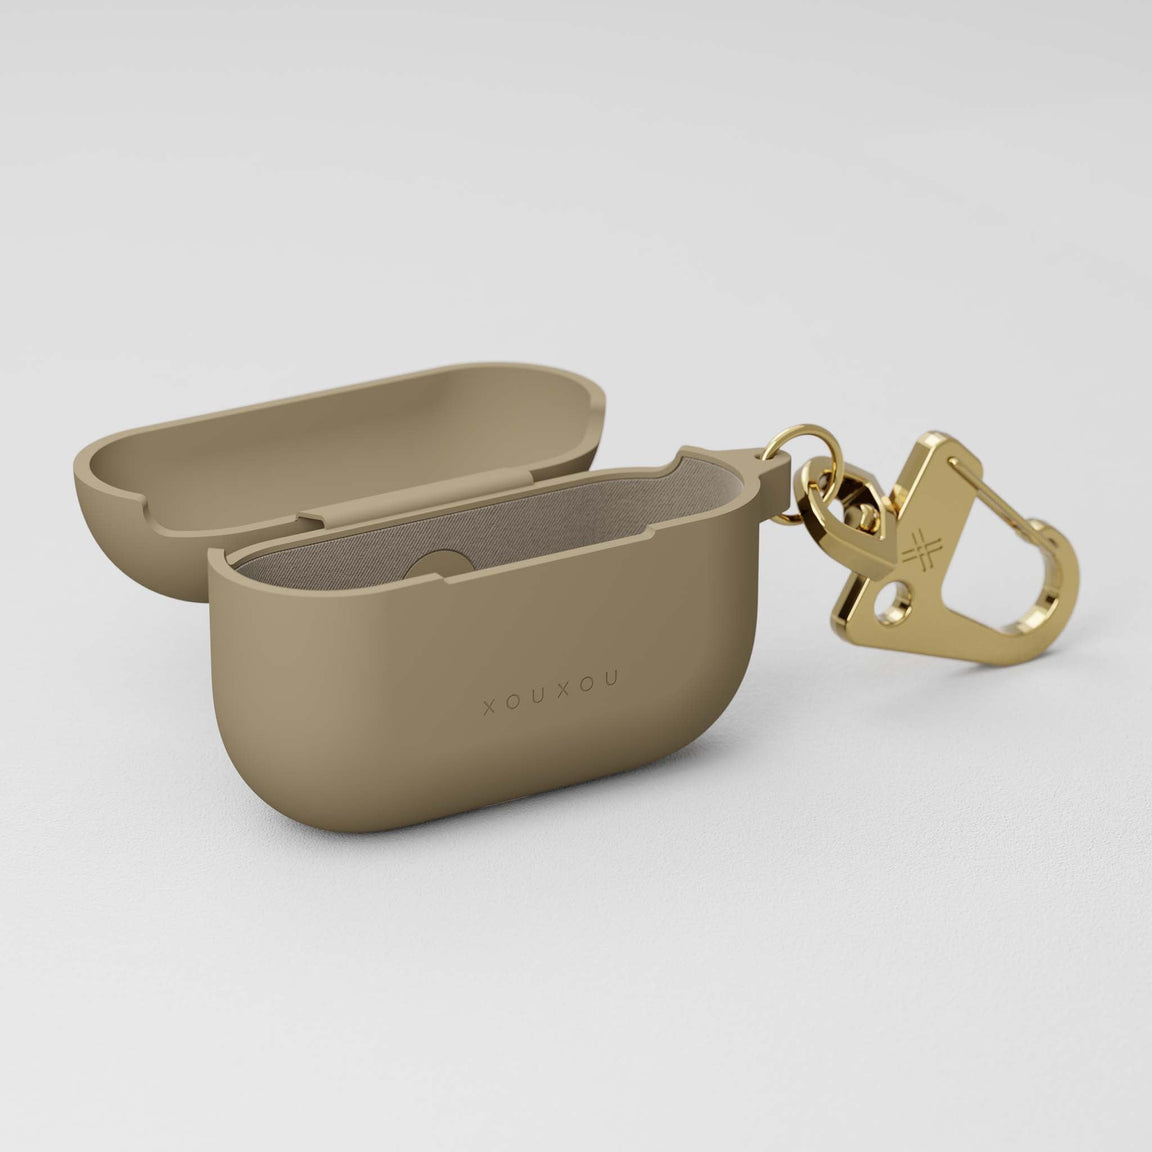 AirPods Pro case in Taupe (Beige) soft-touch and golden metal carabiner | XOUXOU